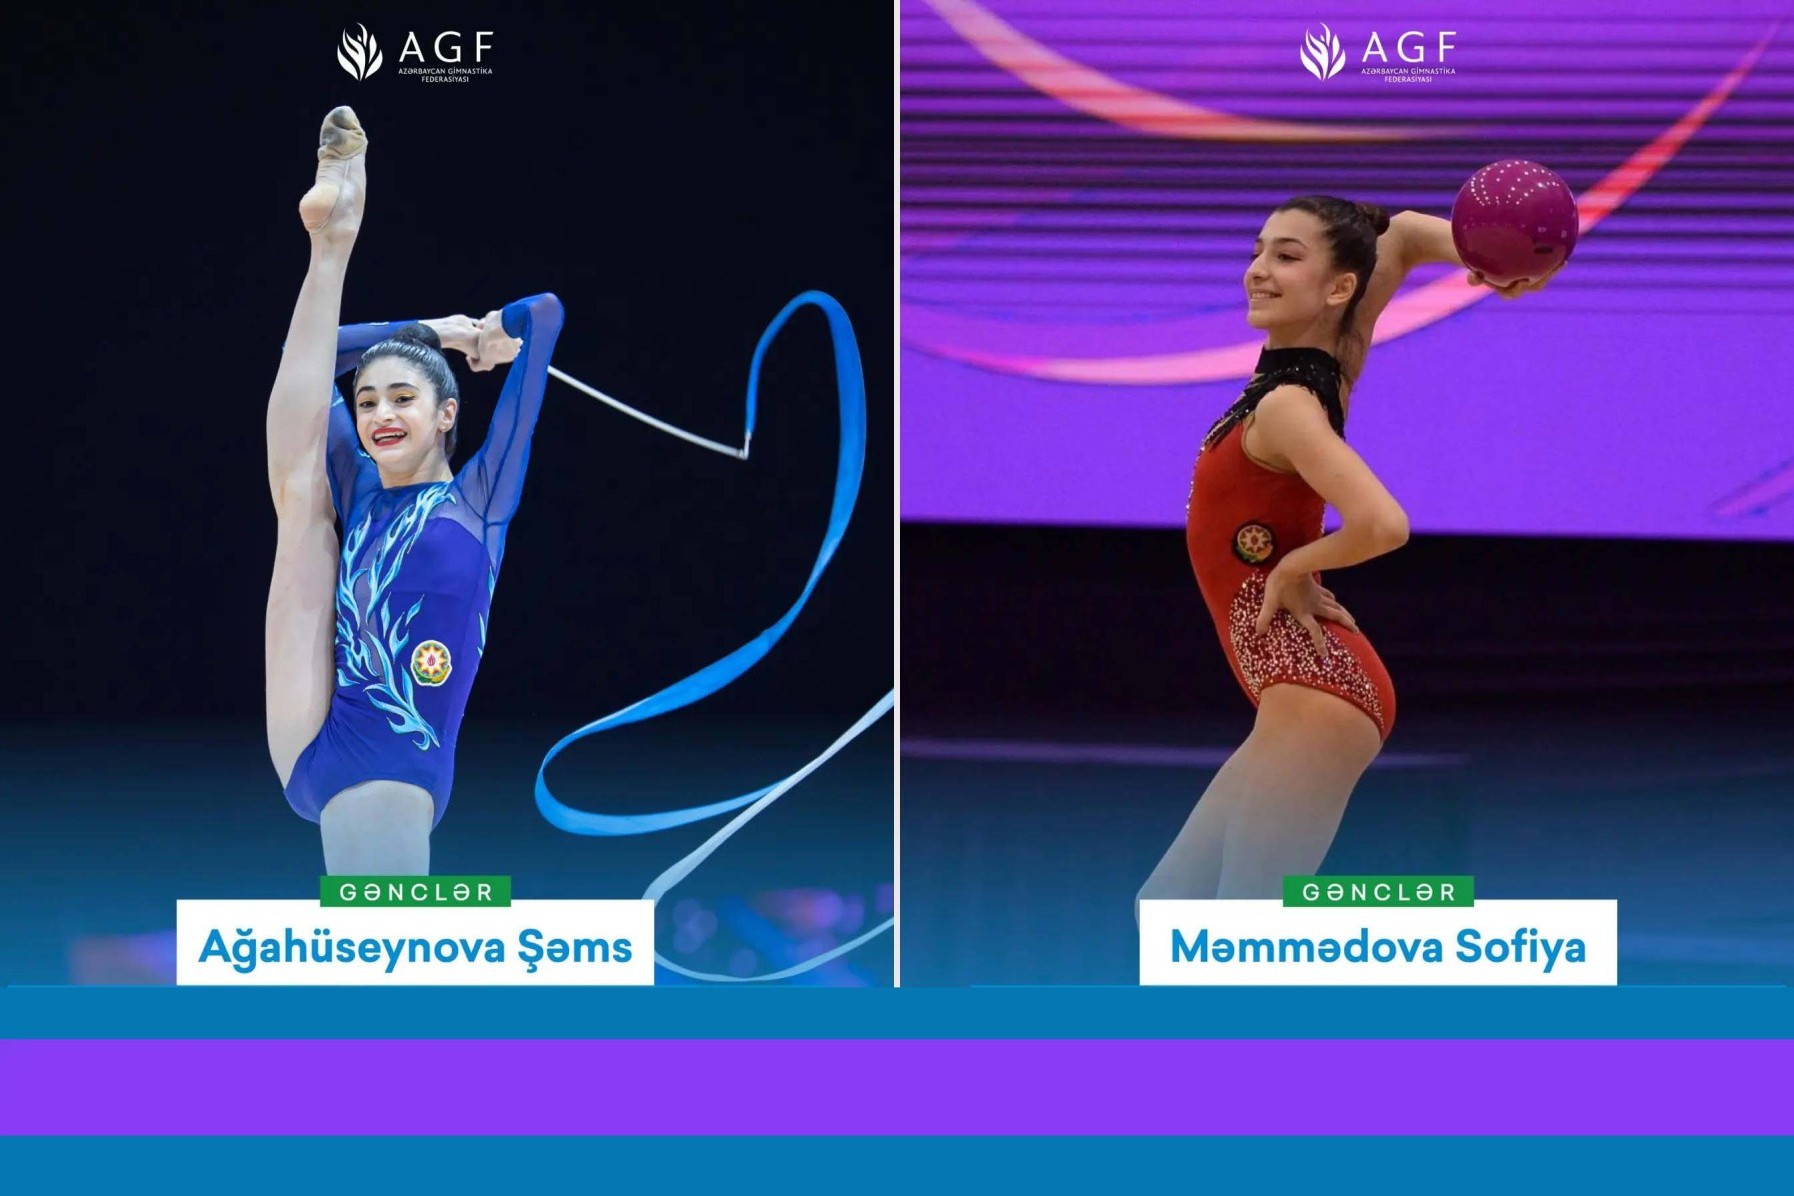 Two Azerbaijani gymnasts will perform at the International Sports Games